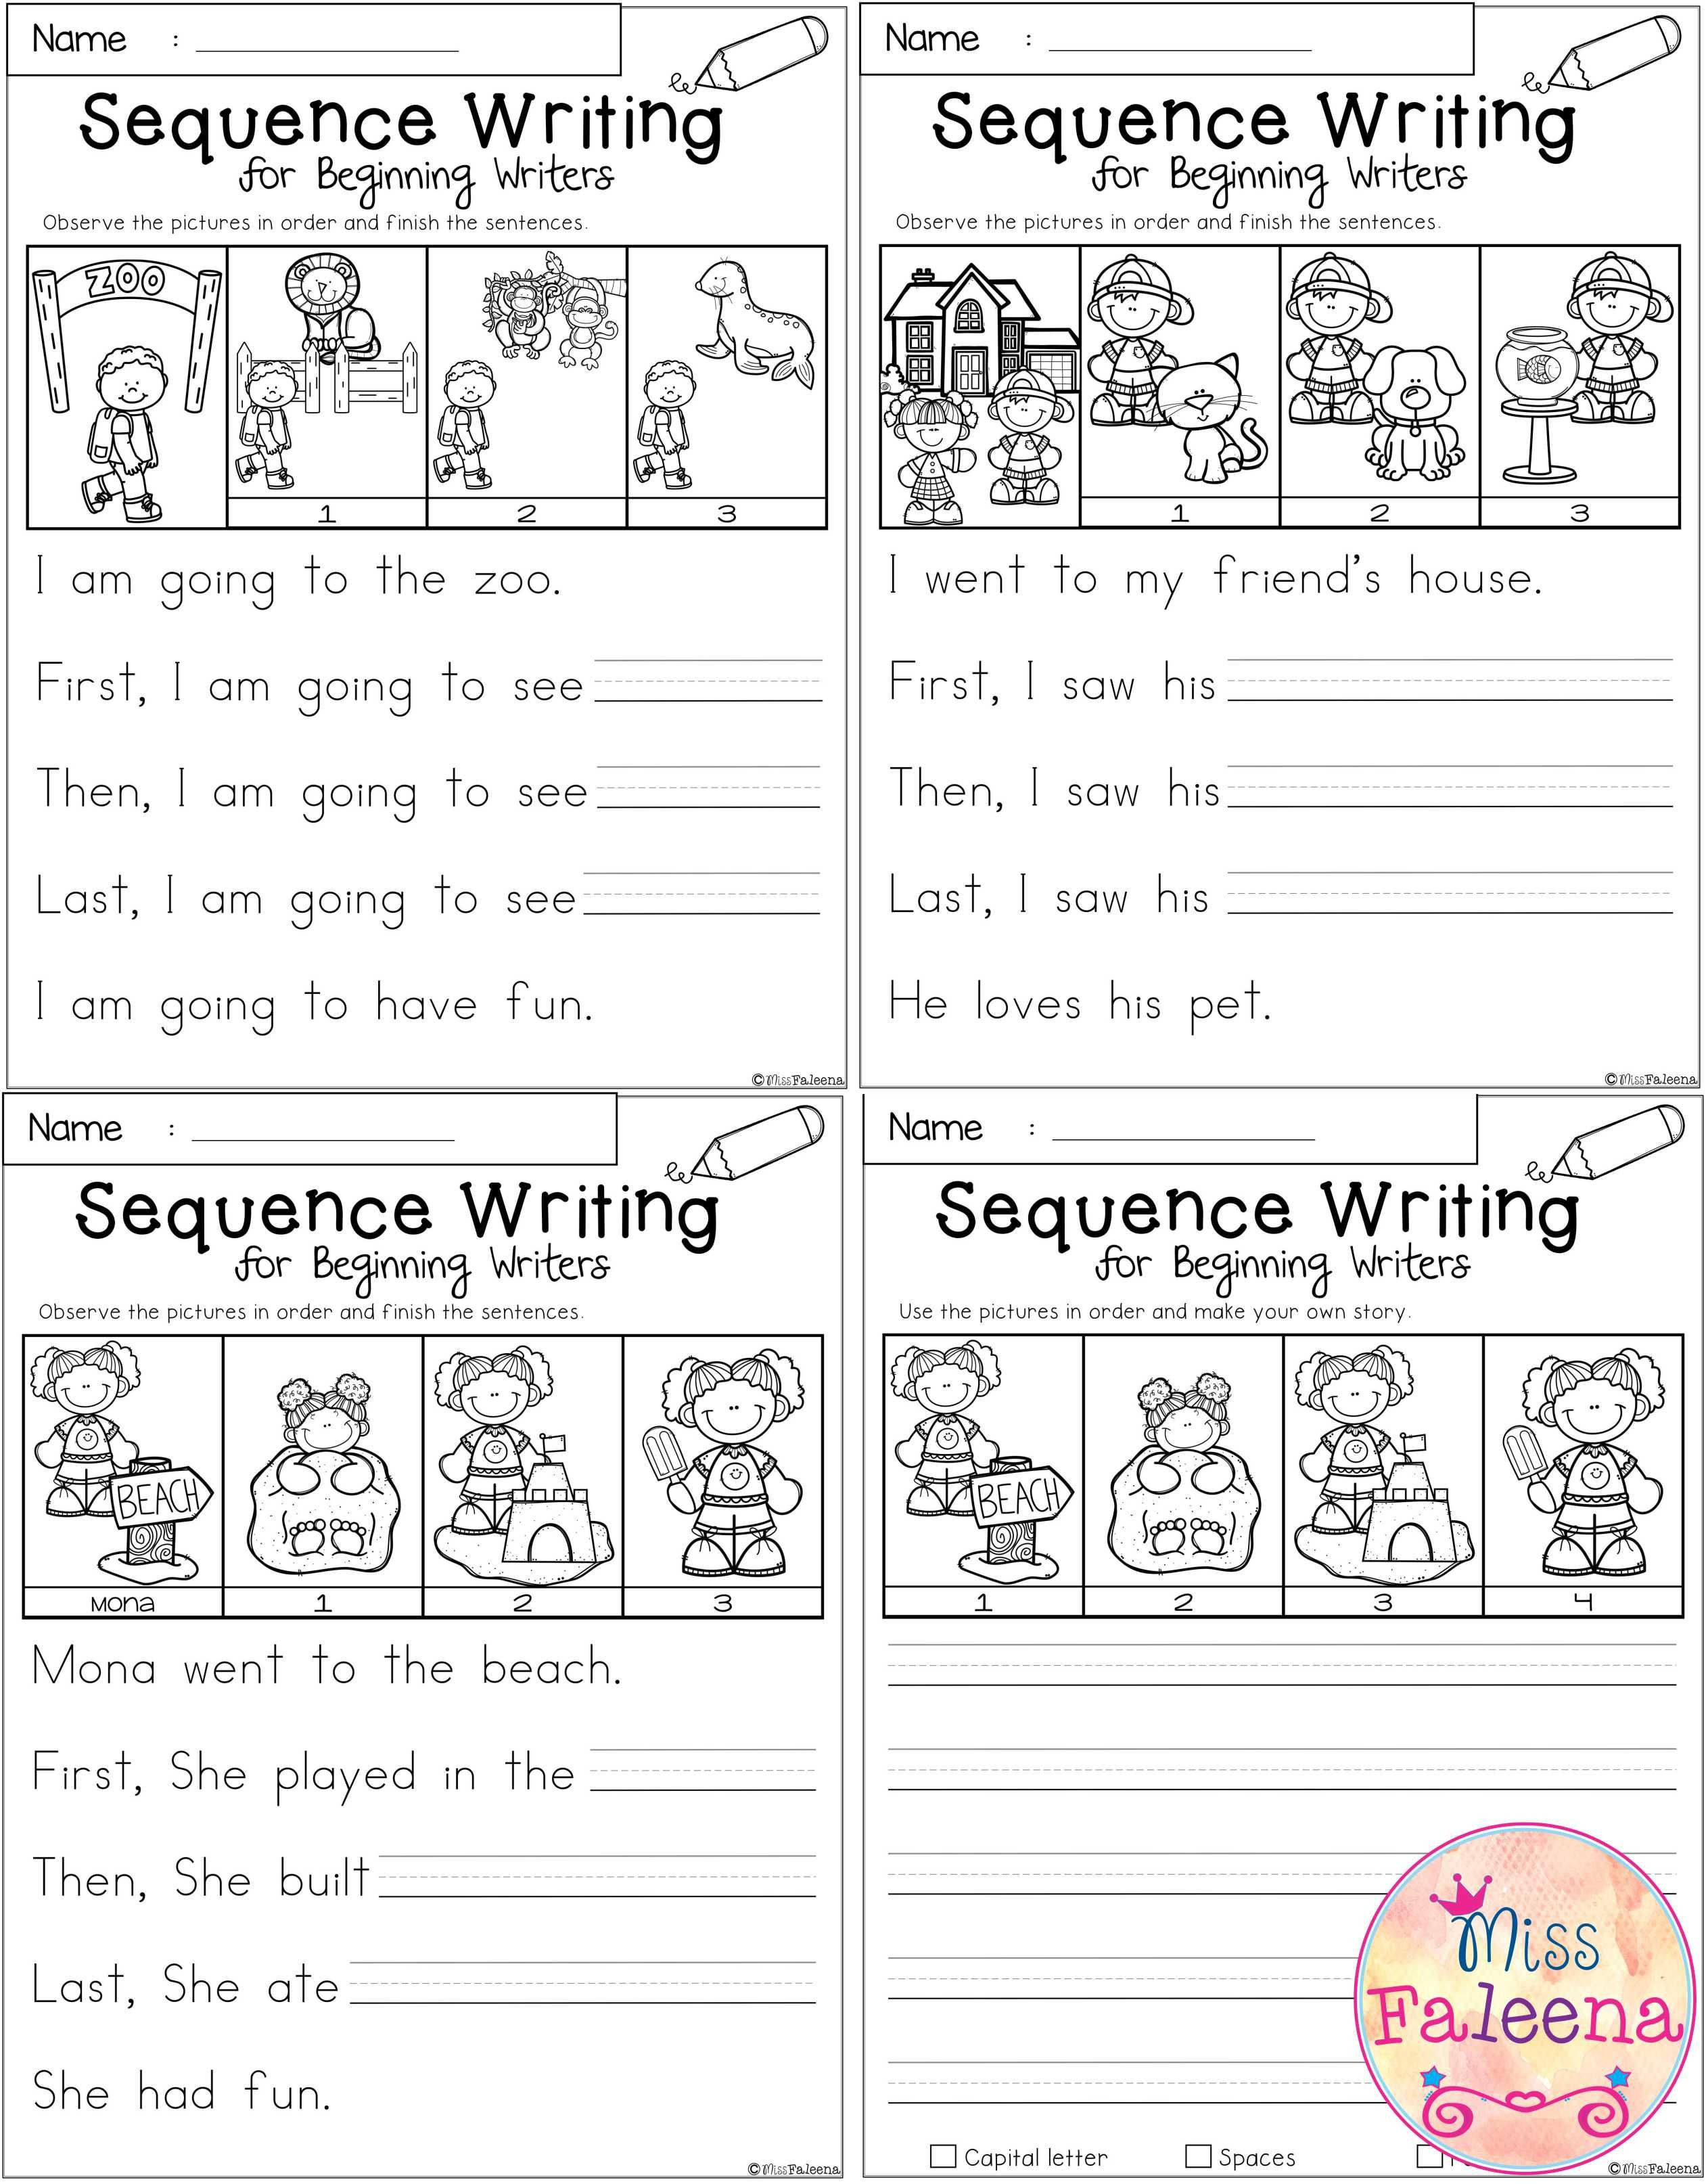 Story Sequencing Worksheets for Kindergarten Free Sequence Writing for Beginning Writers with Images